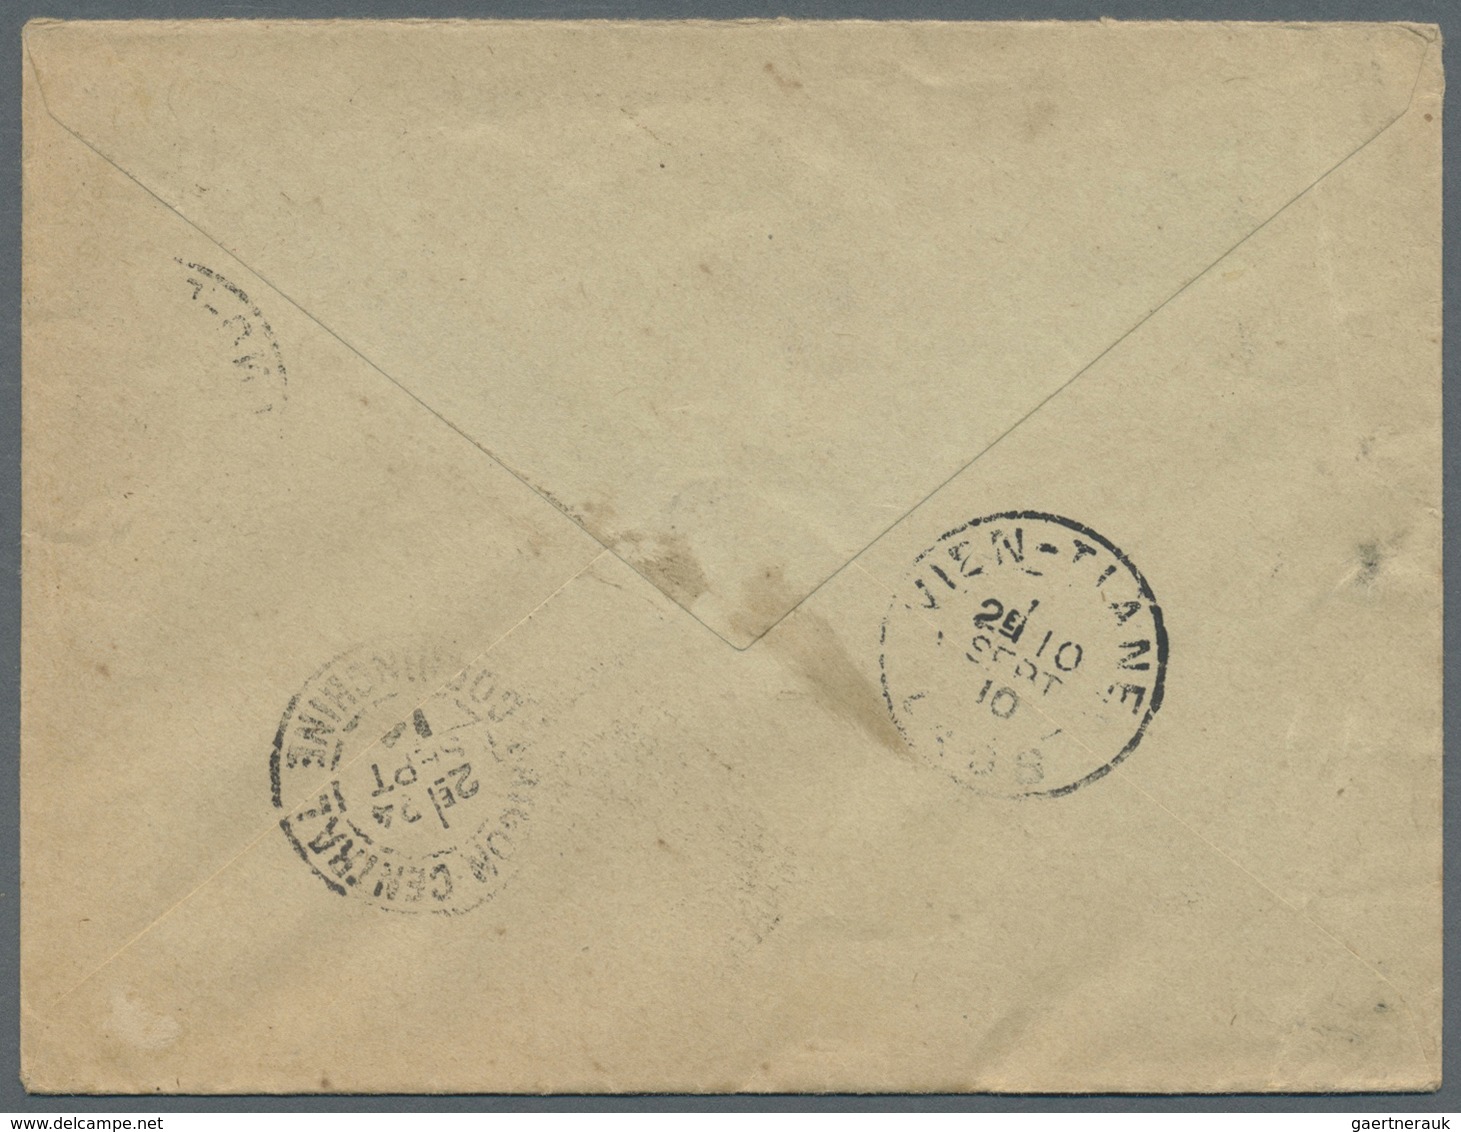 GA Laos: 1910. French Indo-China Postal Stationery Envelope 'Type Annamite' 10c Red Cancelled By Luang- - Laos